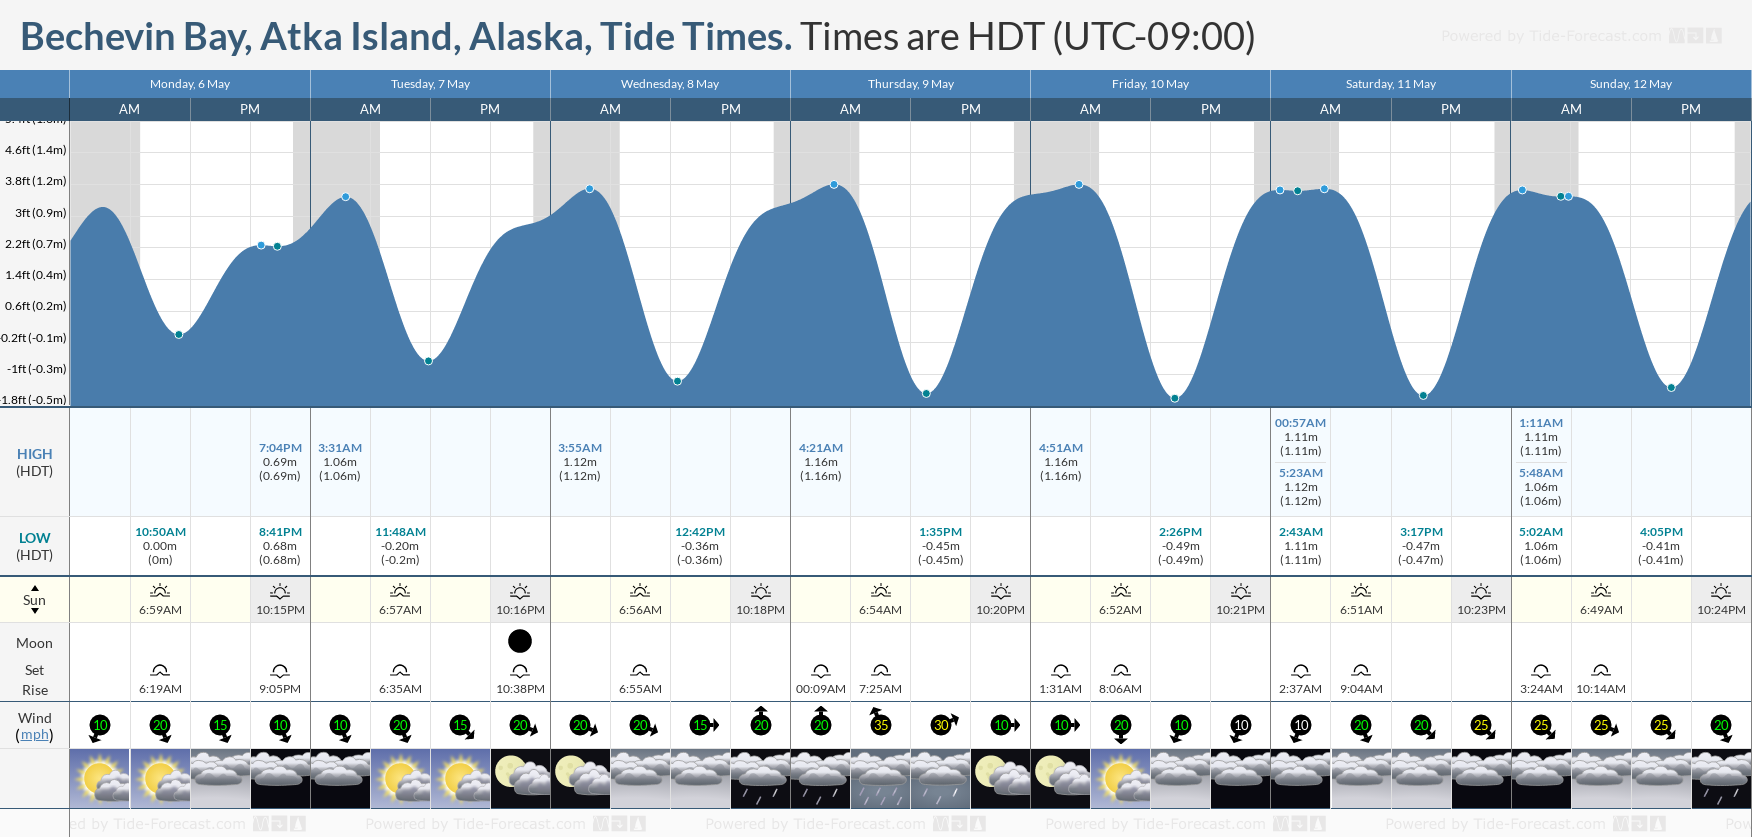 Bechevin Bay, Atka Island, Alaska Tide Chart including high and low tide tide times for the next 7 days